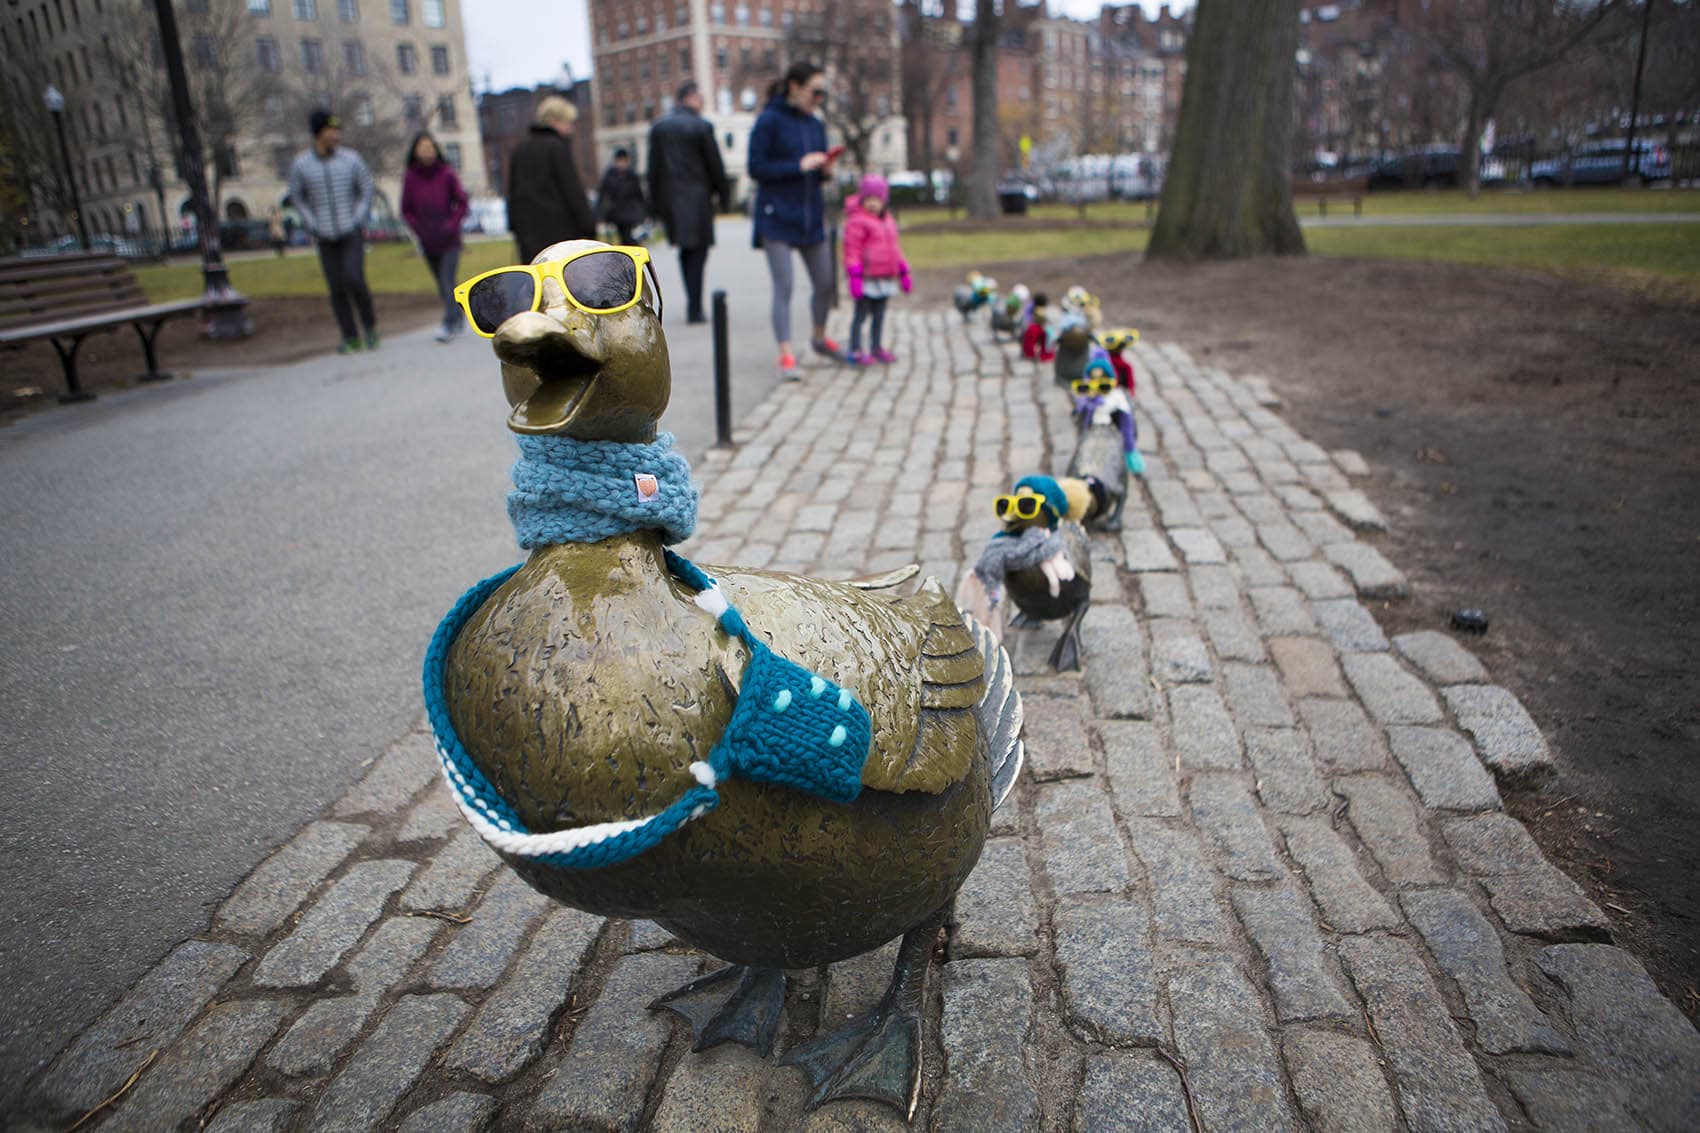 Nancy Schon's Make Way For Ducklings Statues dreassed in winter clothing in The Public Gardens. (Jesse Costa/WBUR)